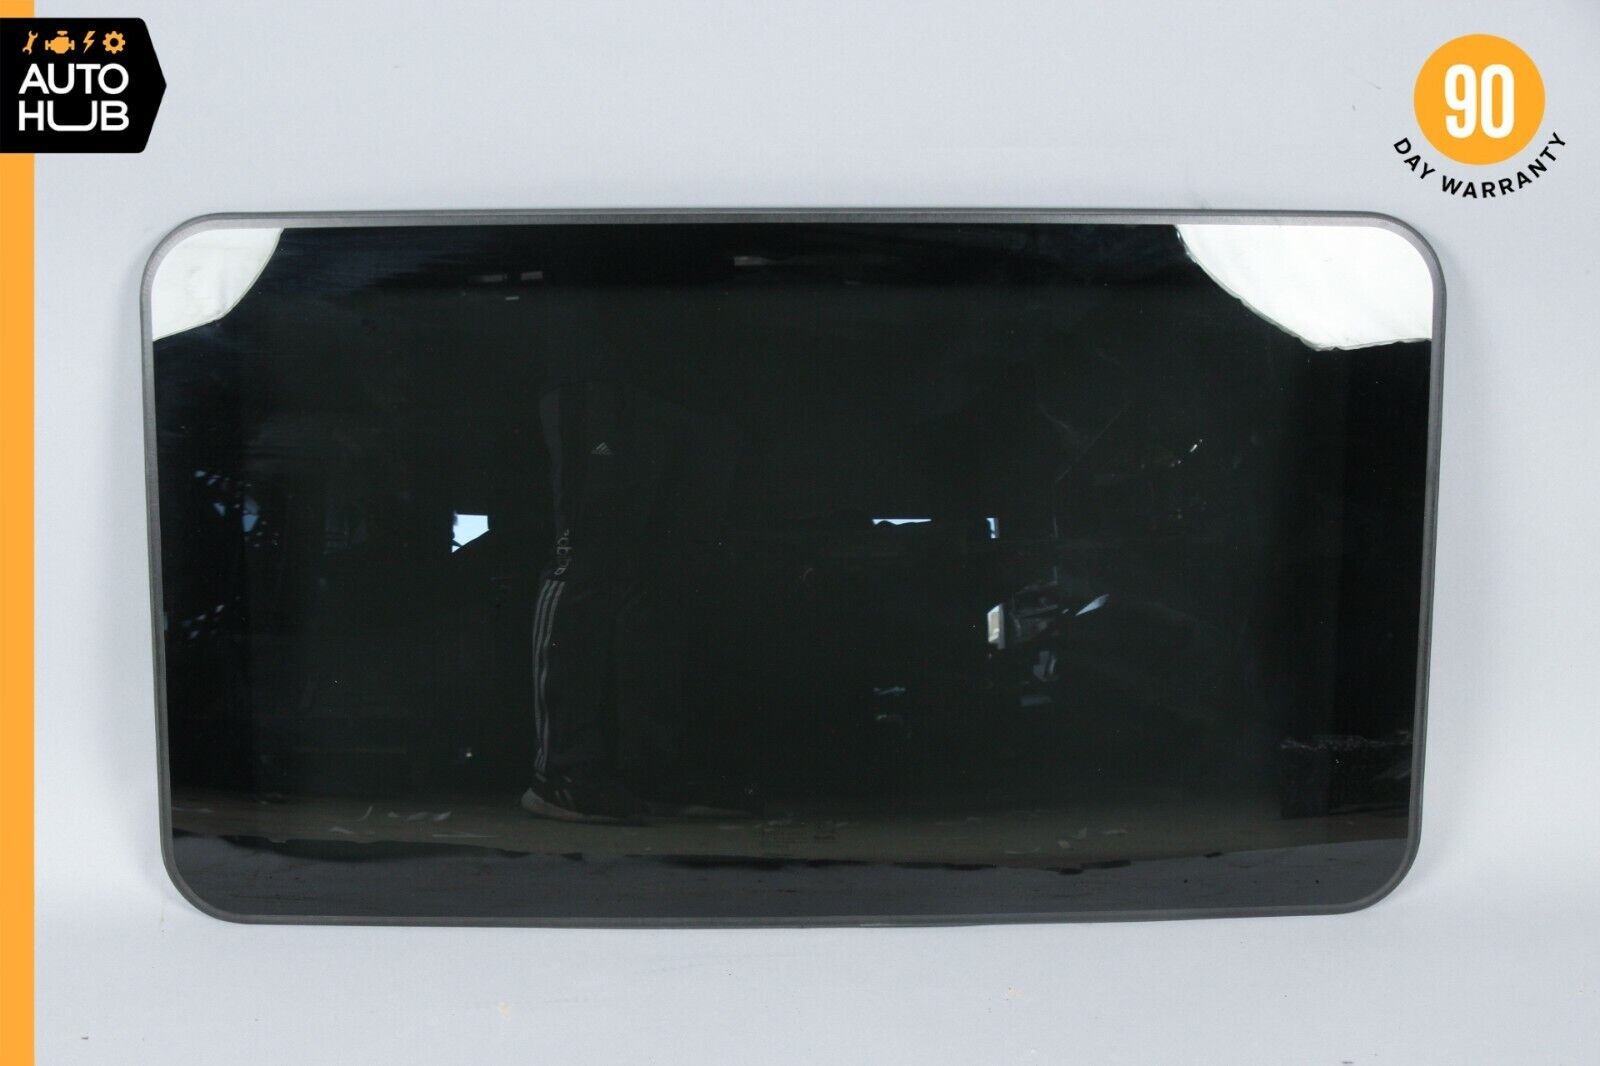 07-14 Mercedes W216 CL550 CL63 AMG Sunroof Sun Roof Glass 2167800021 OEM